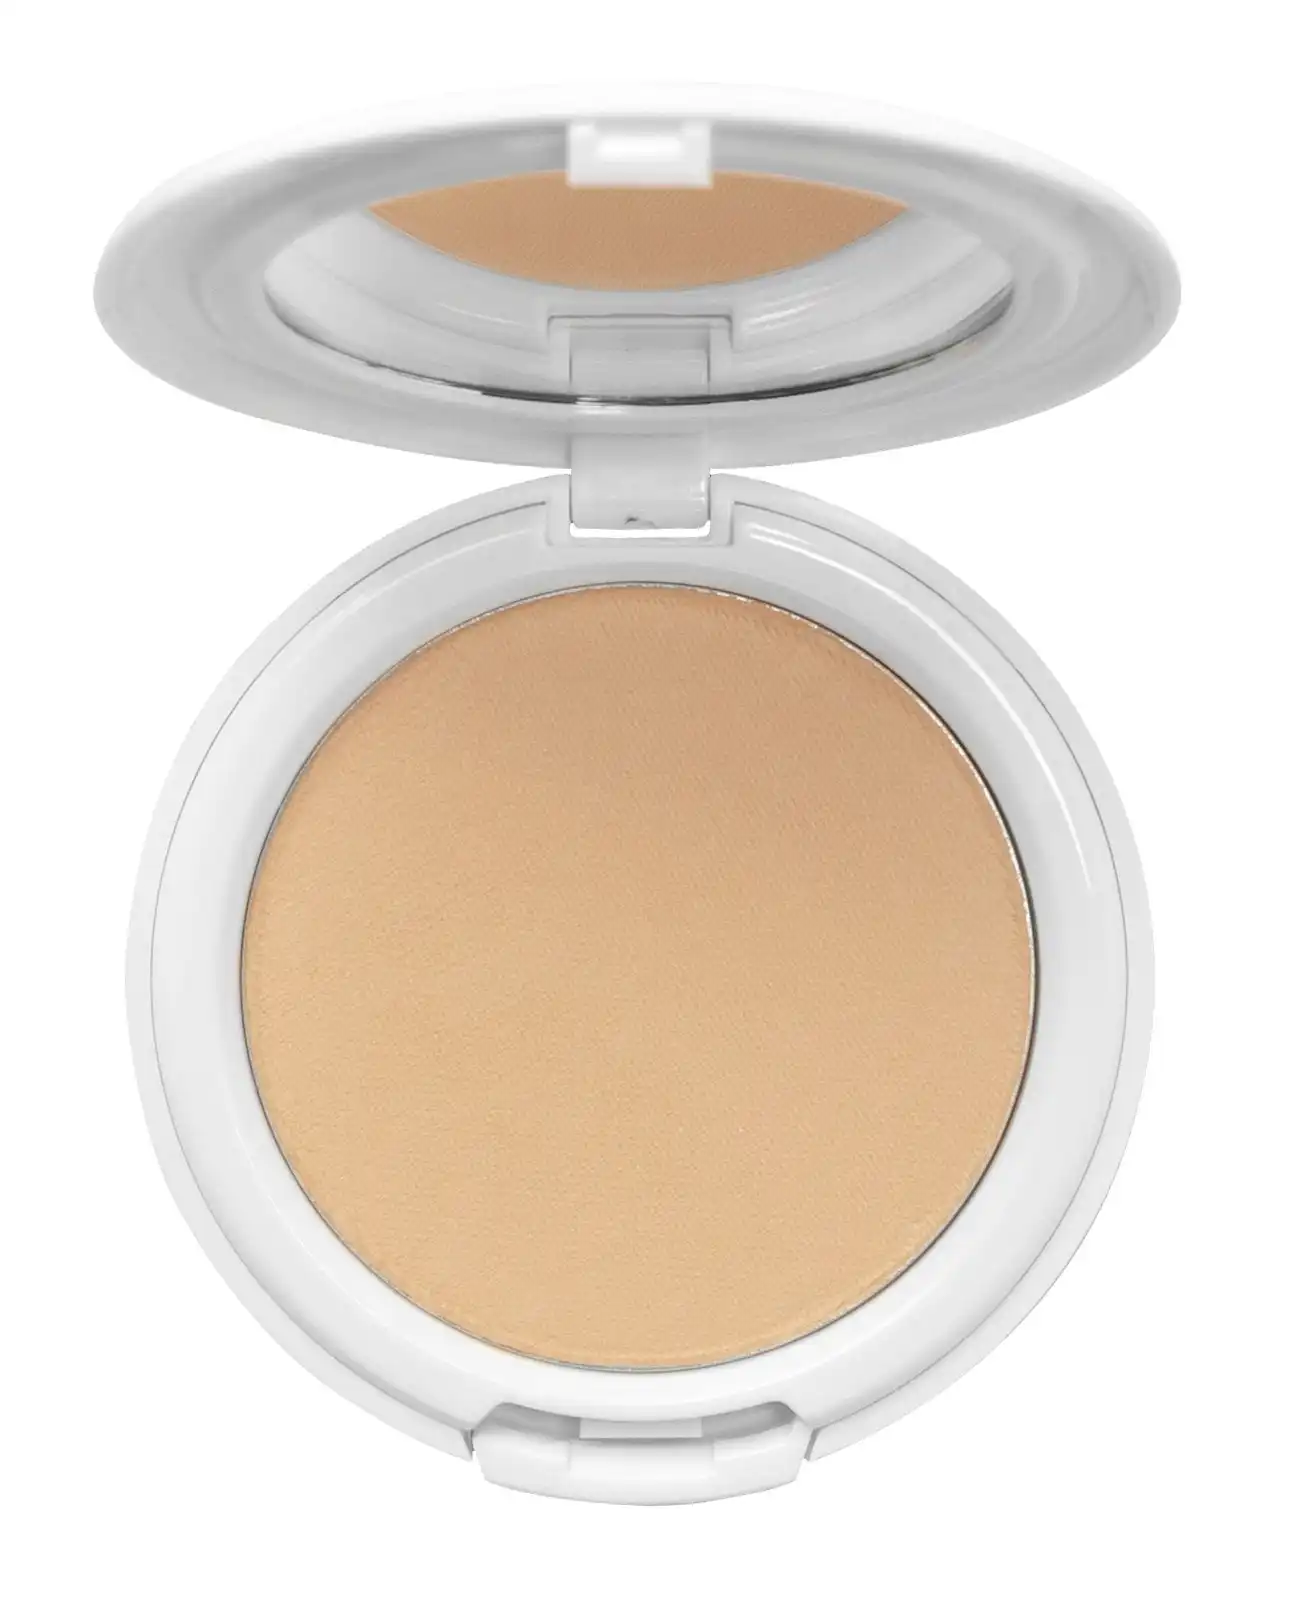 Thin Lizzy 6in1 Professional Powder Compact Light